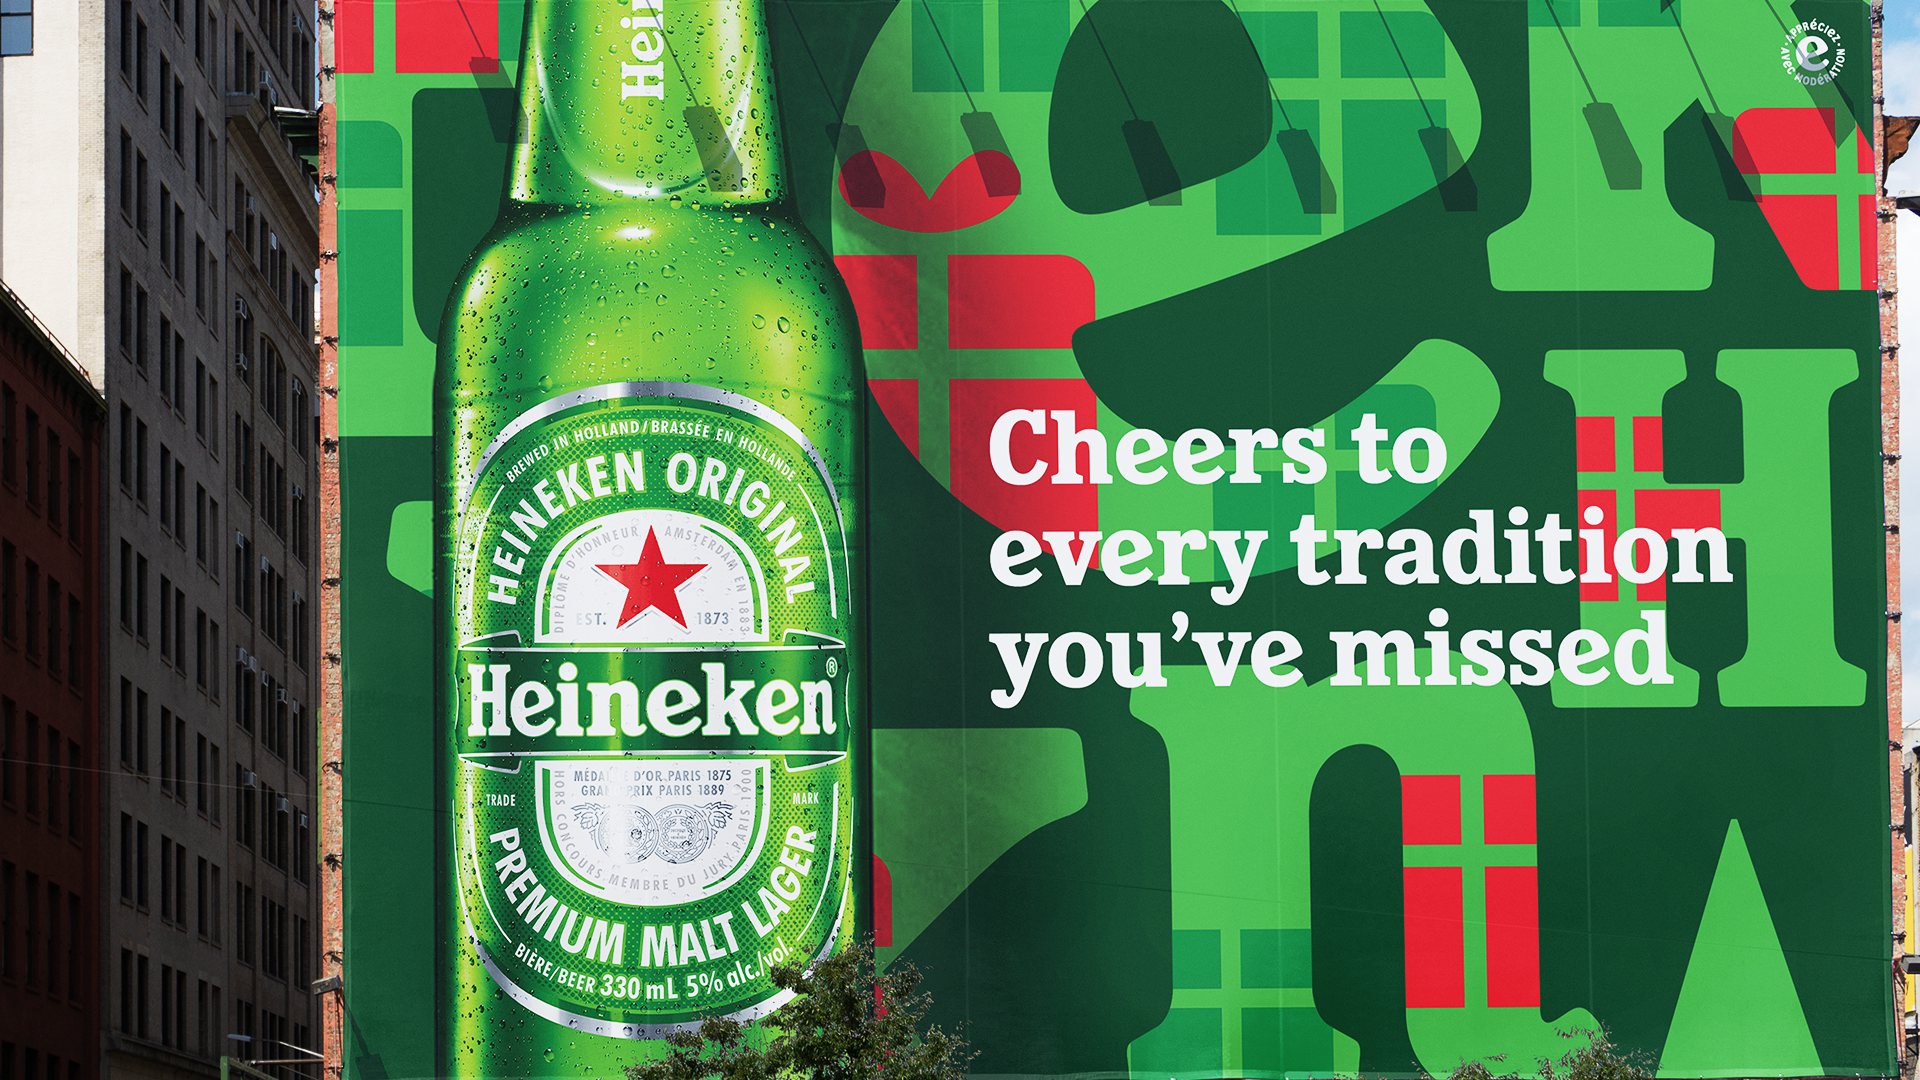 Share Your Perfectly Imperfect Holiday Traditions With Heineken